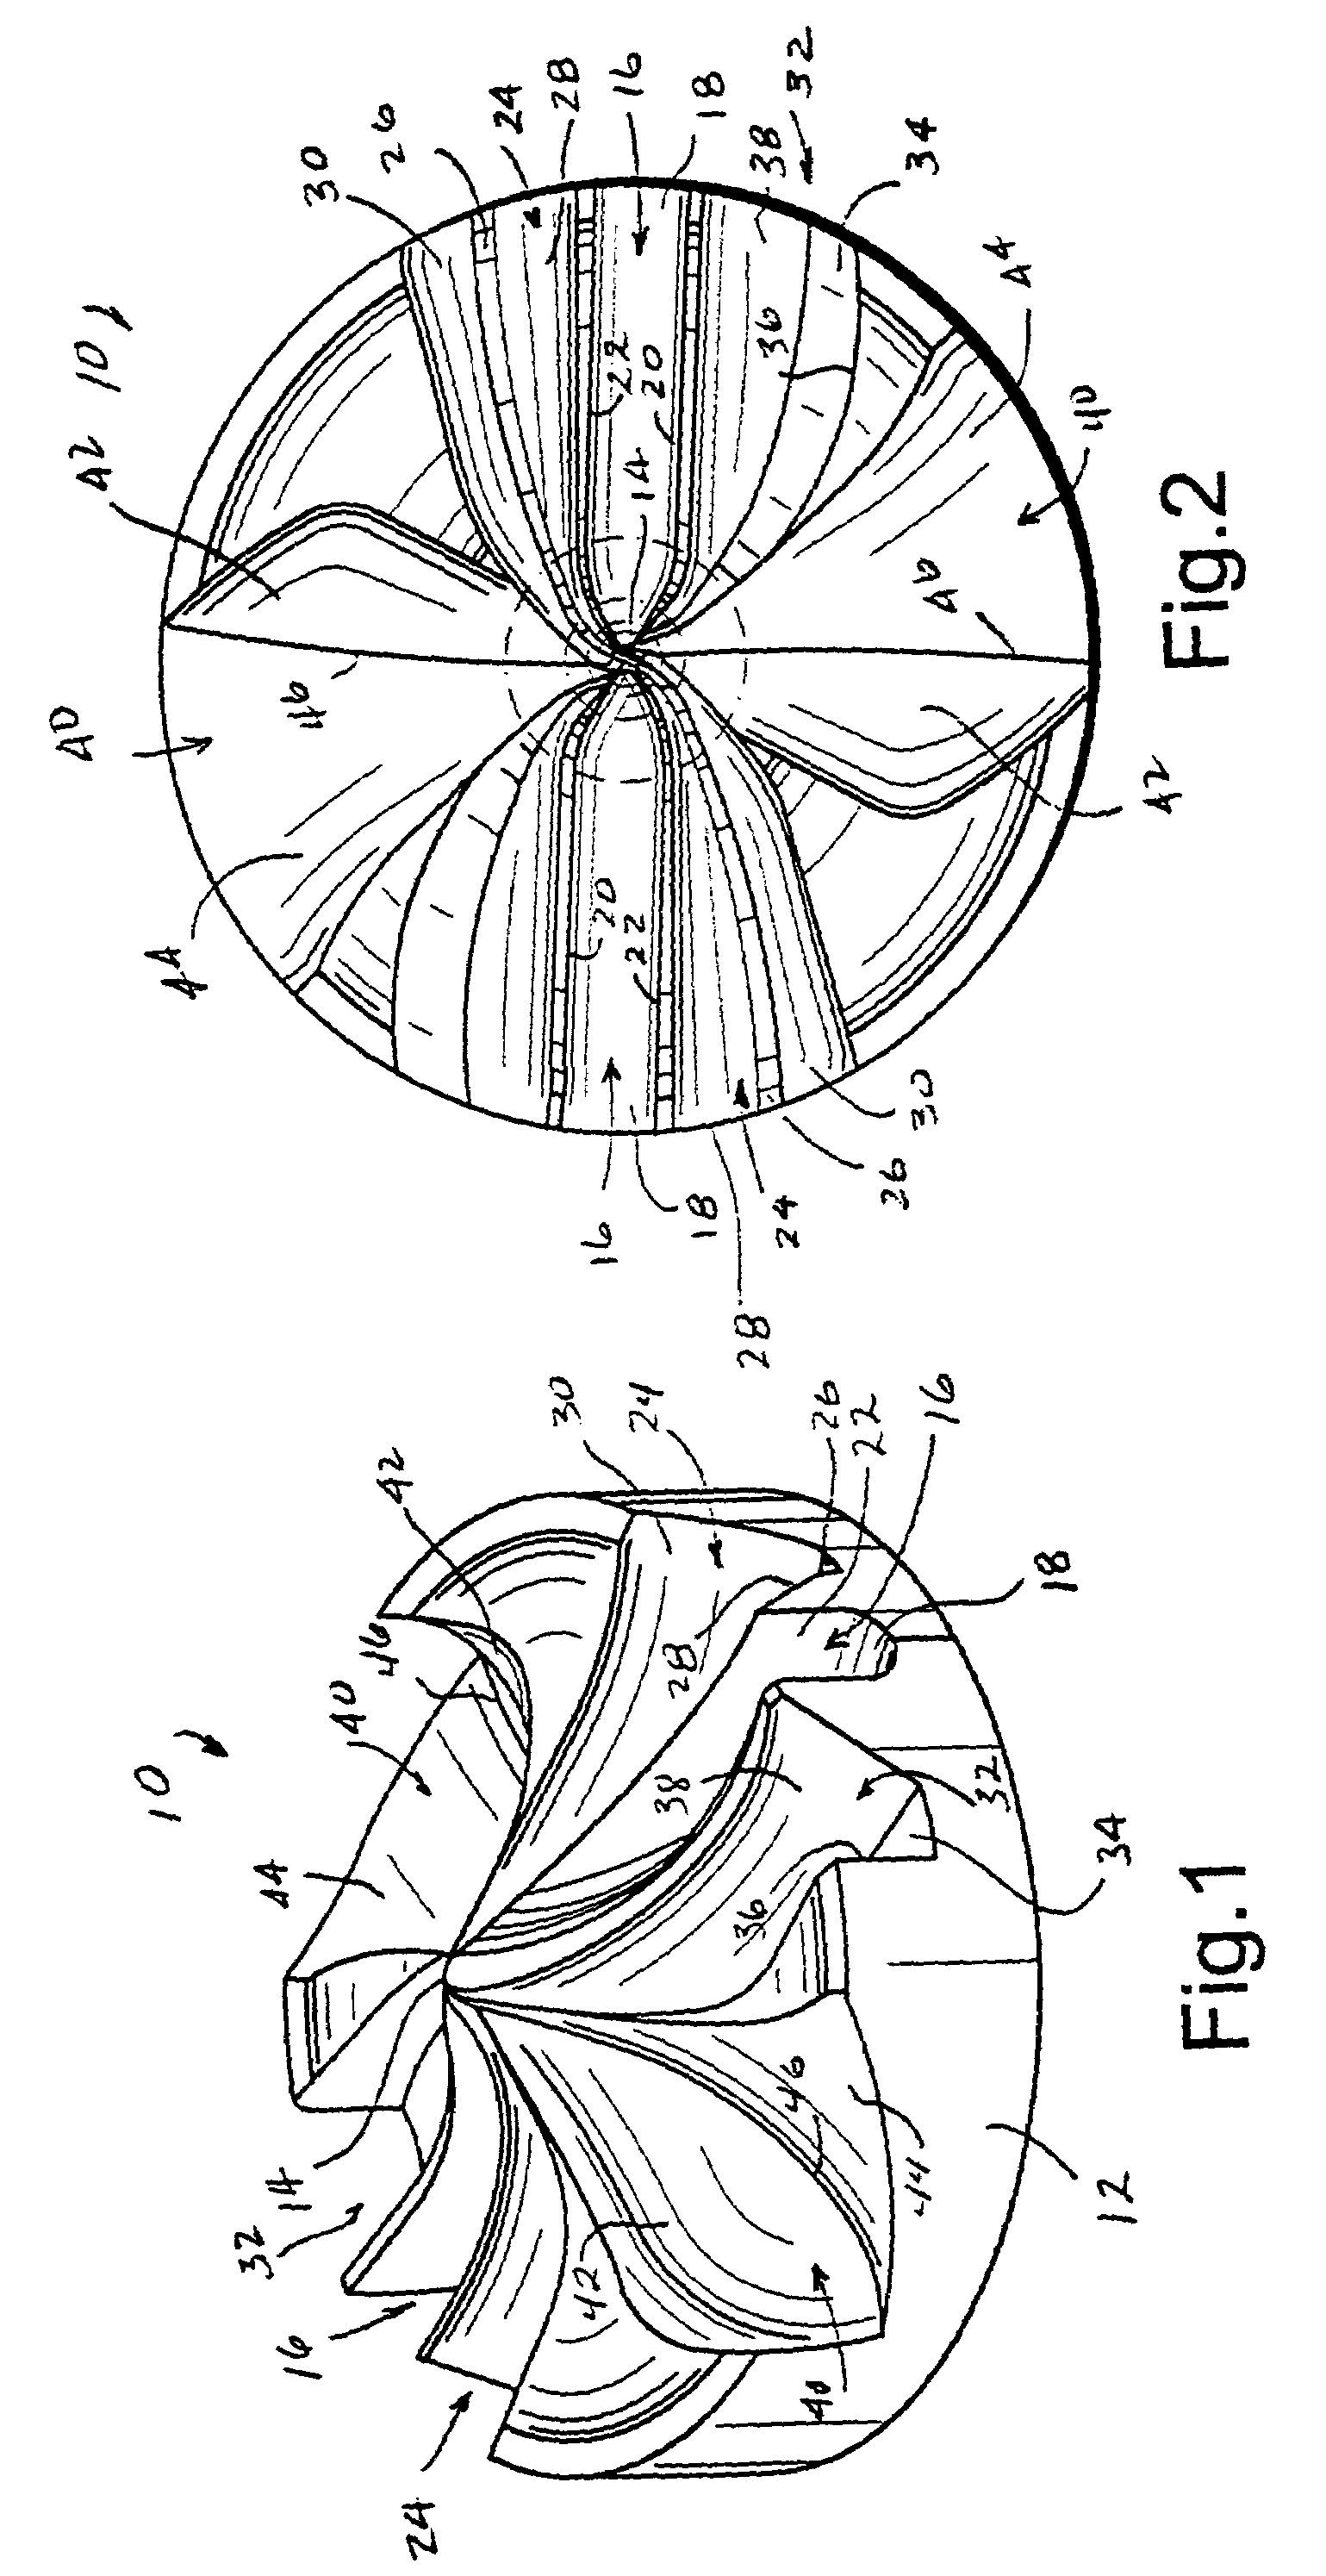 Water distribution plate for rotating sprinklers